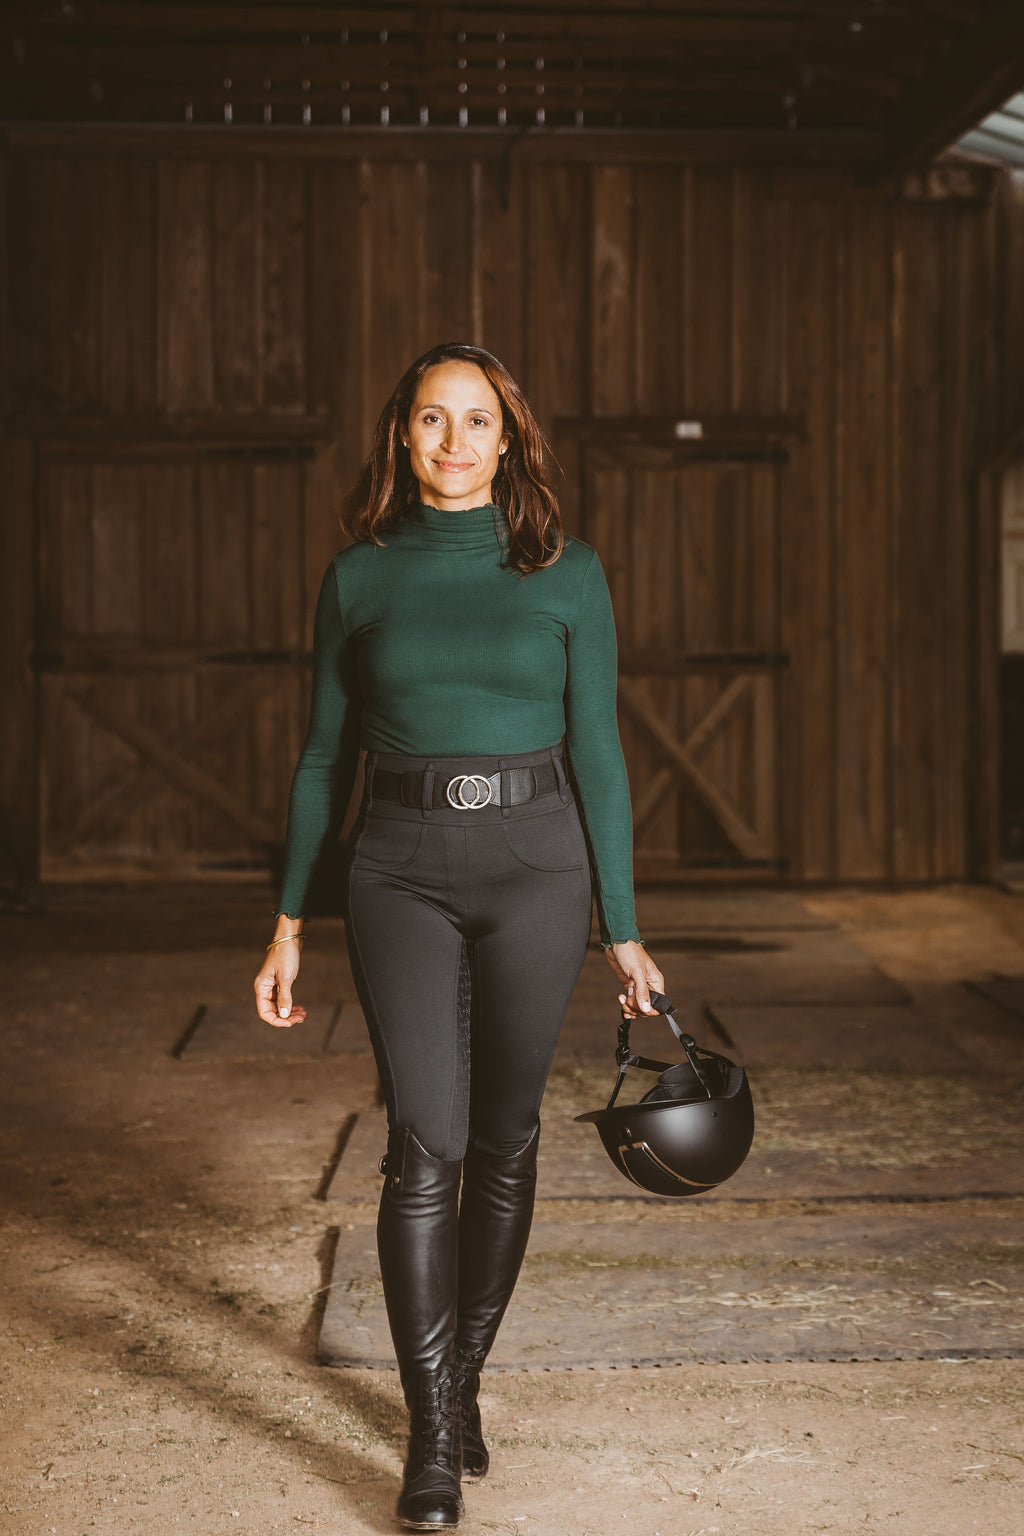 Equestrian woman wearing Canter Culture's black athletic breech featuring a high waist and faux front pockets.